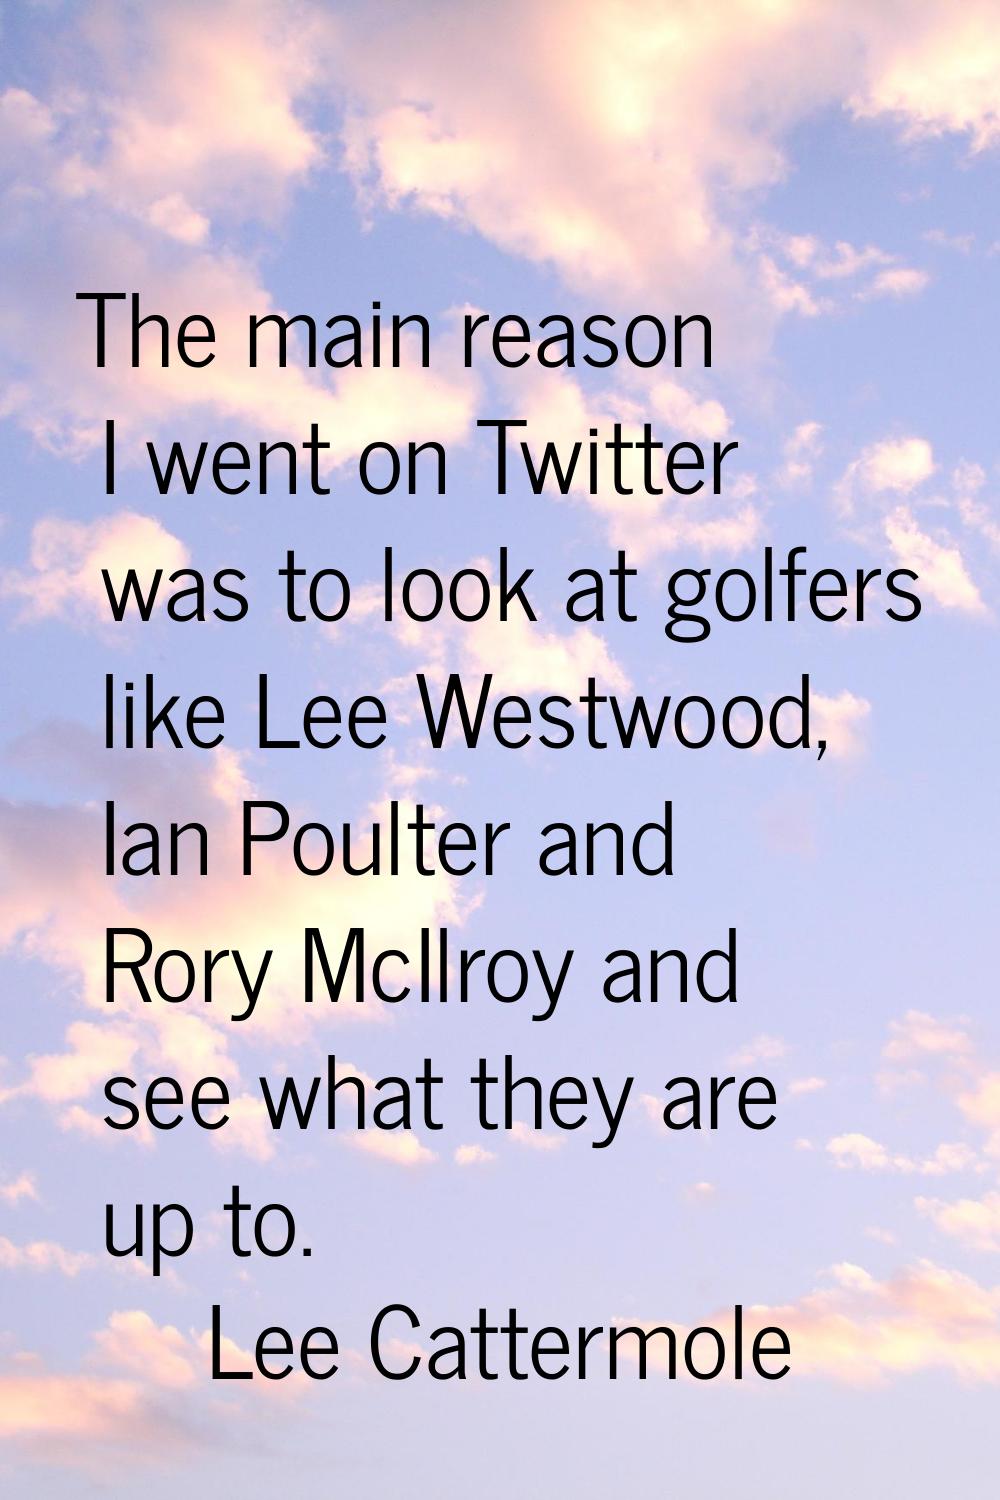 The main reason I went on Twitter was to look at golfers like Lee Westwood, Ian Poulter and Rory Mc